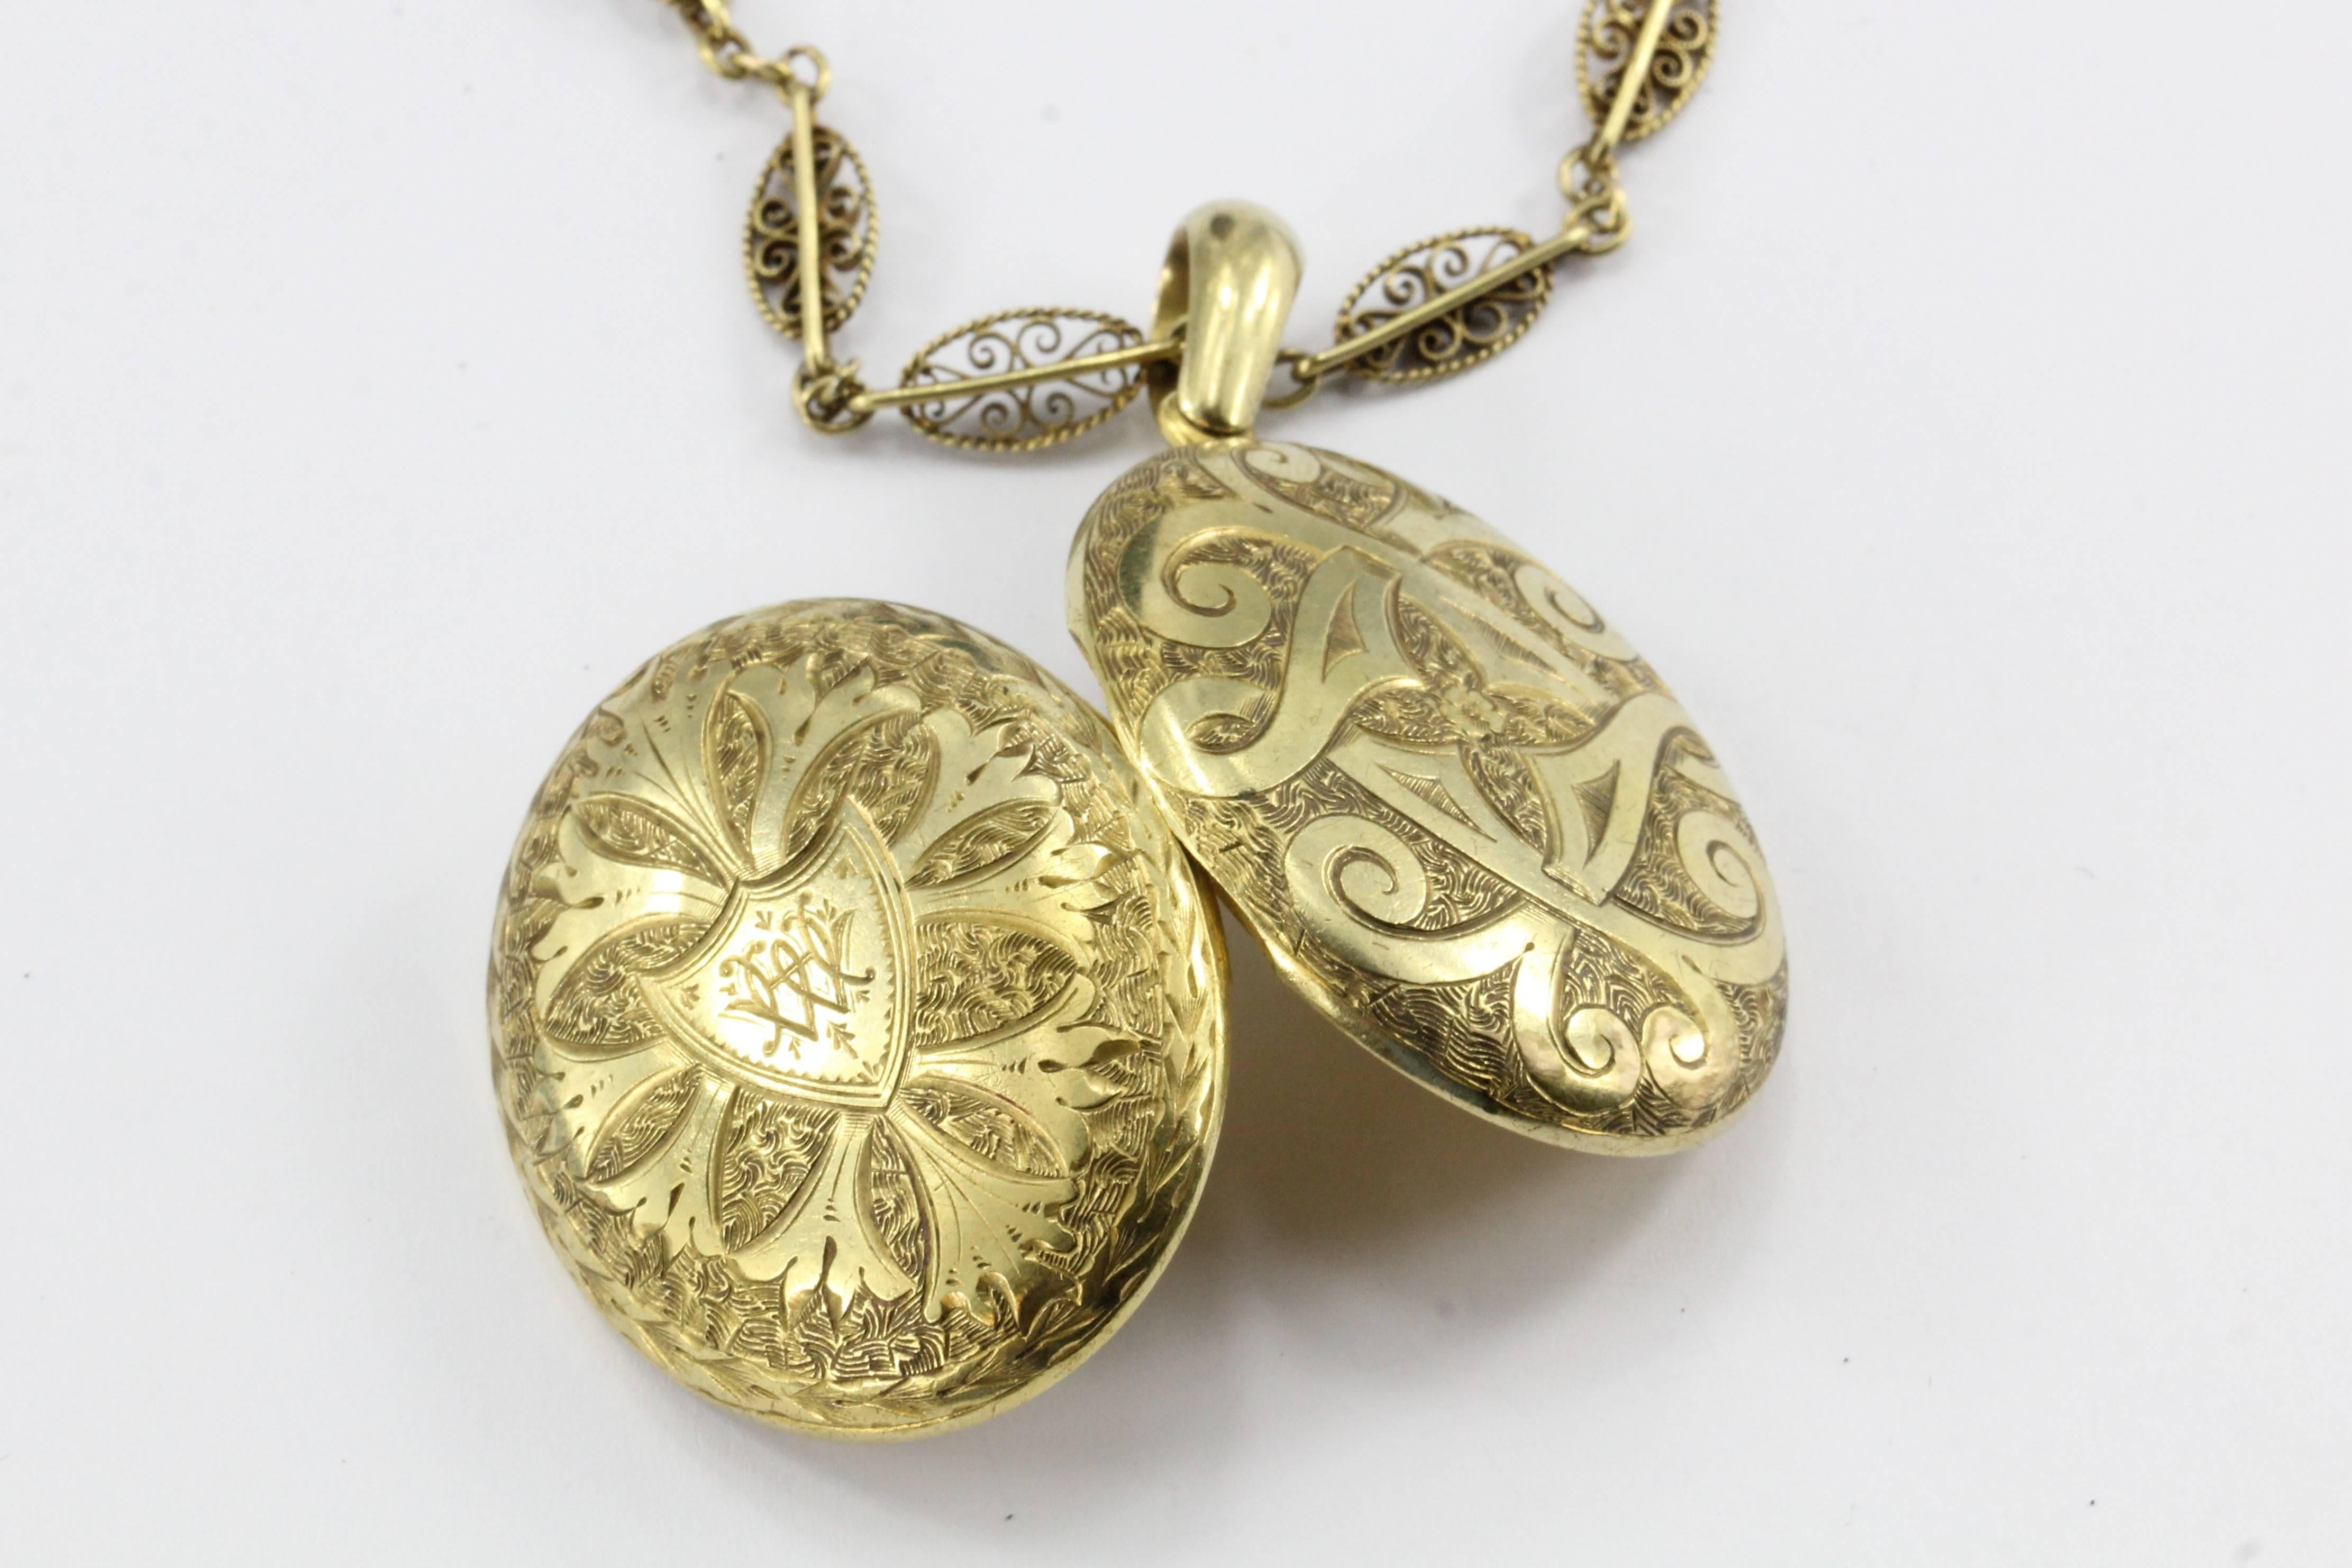 Women's Victorian Gothic Revival Oval Gold Locket and Filigree Necklace, circa 1890